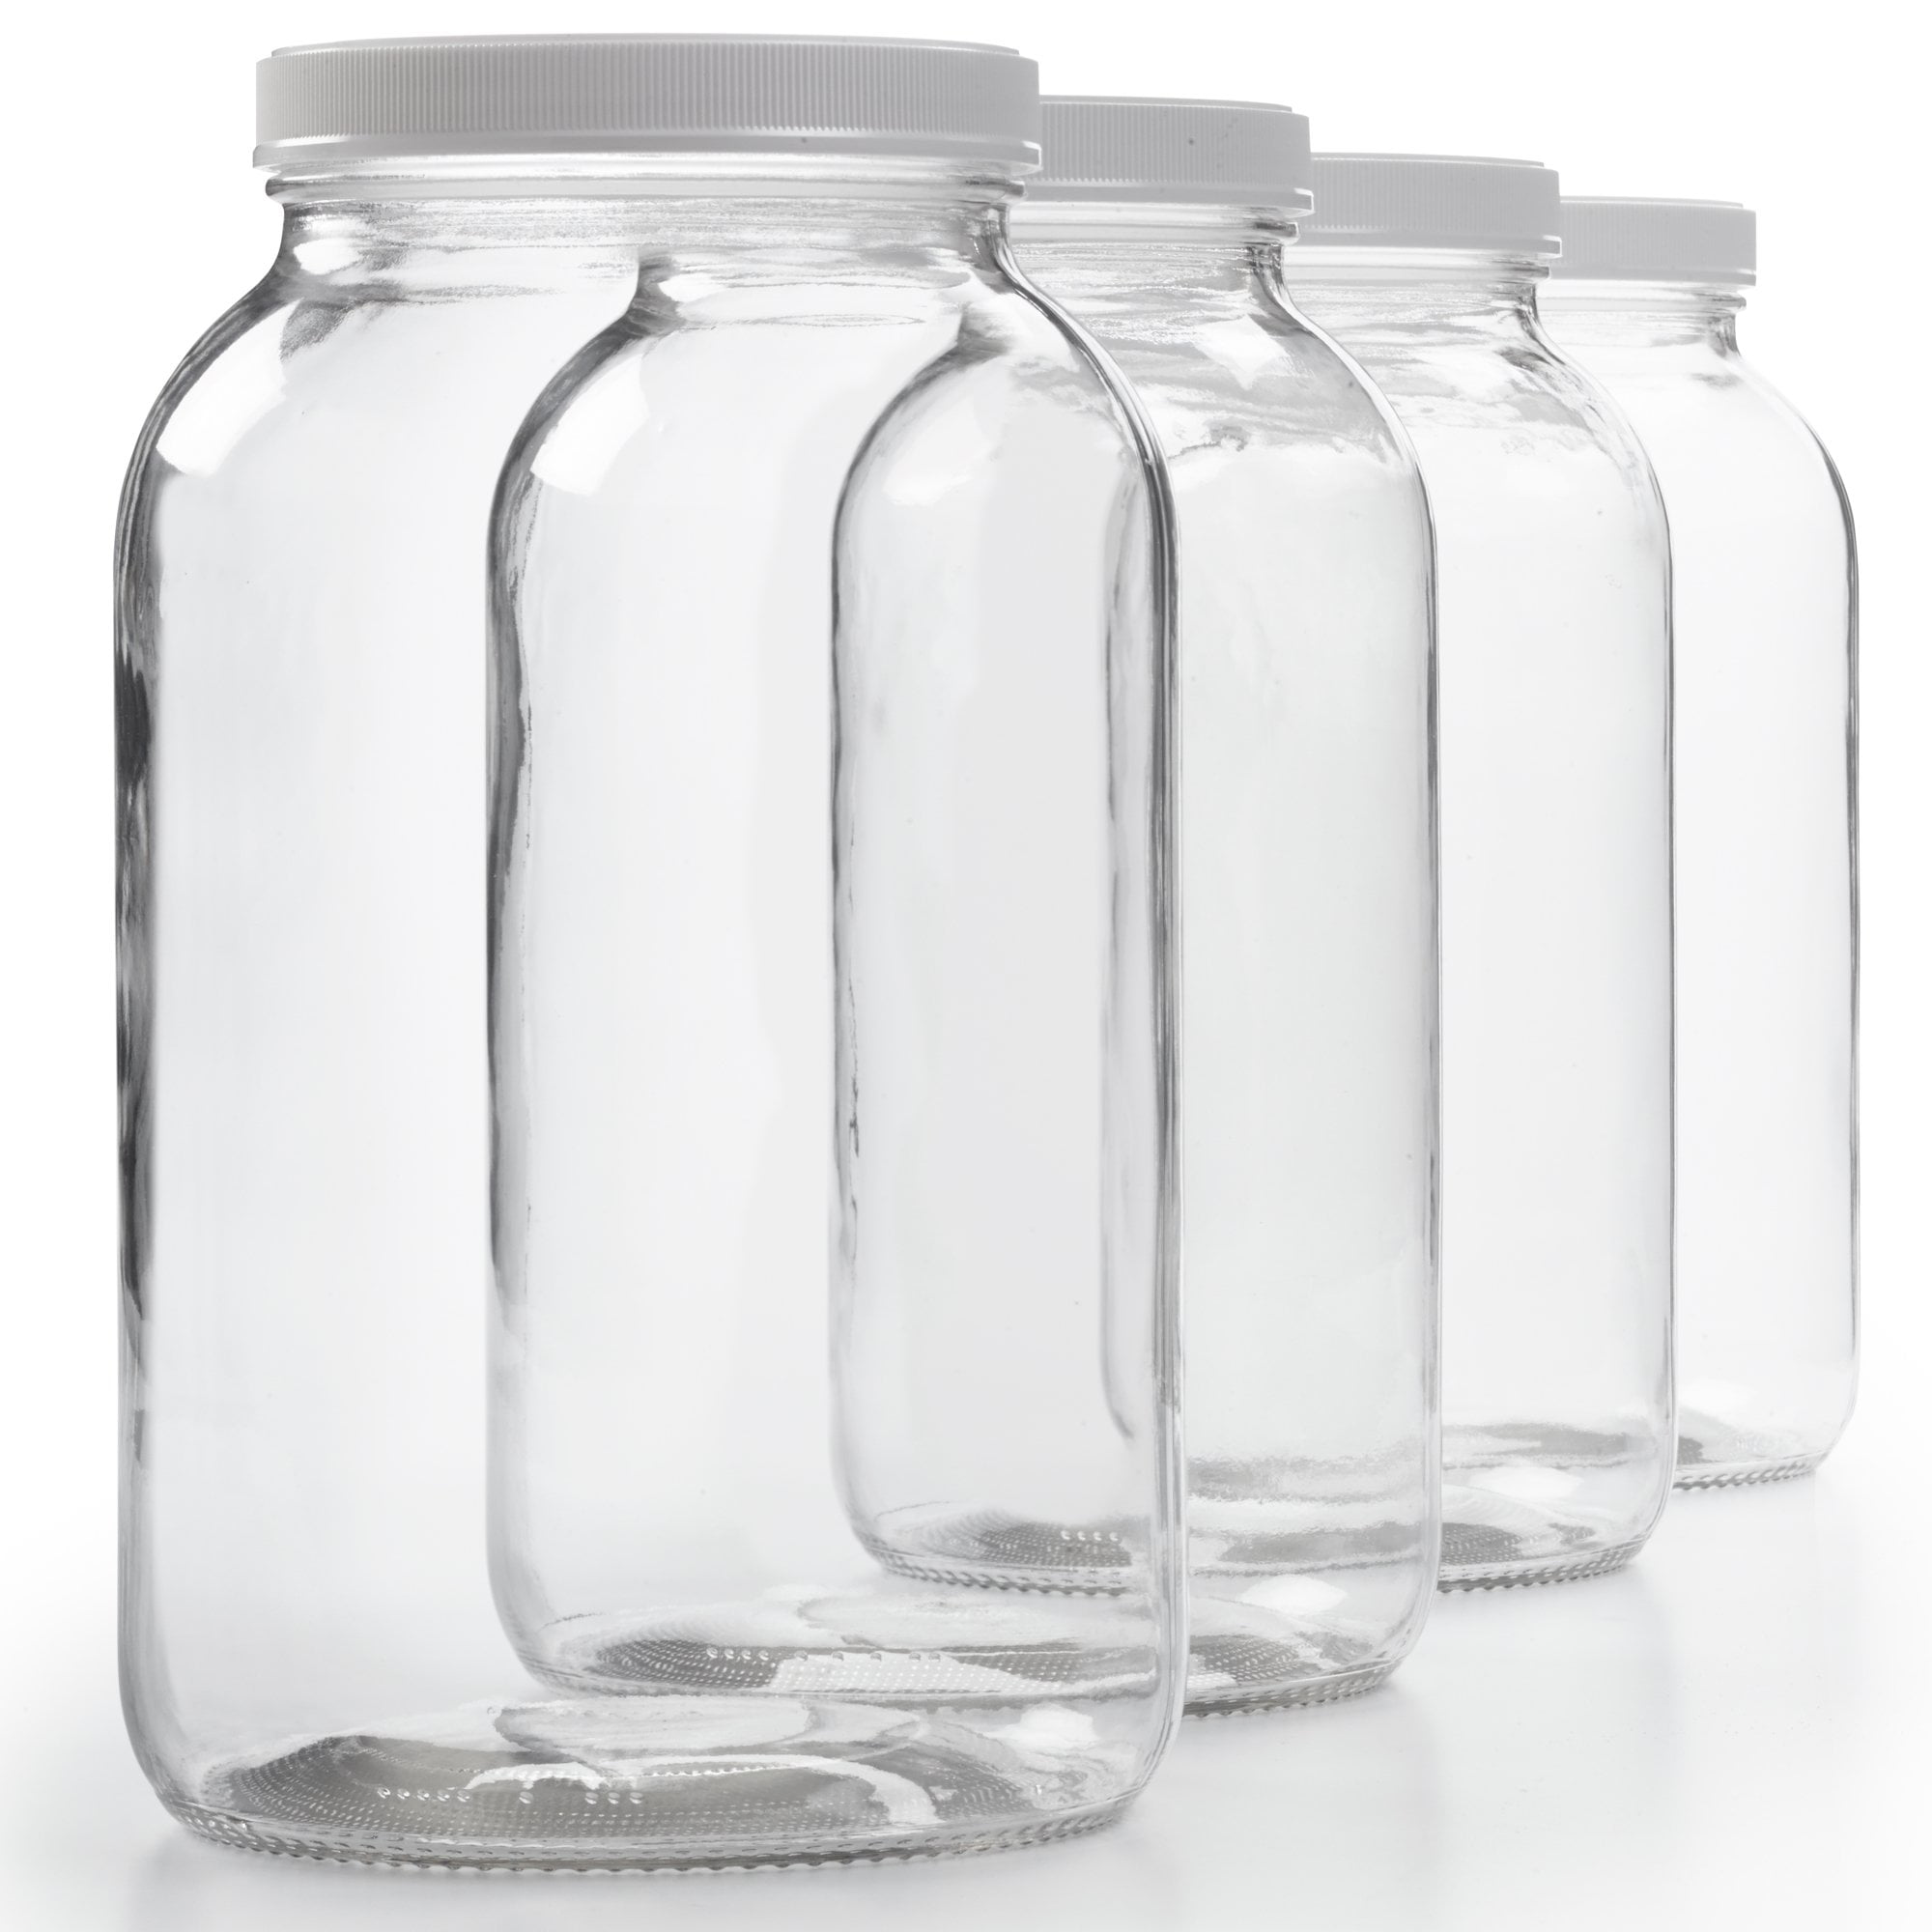 1-Gallon Clear Glass Large Jar Wide Mouth w/Airtight Metal Lid For Storing  2Pack